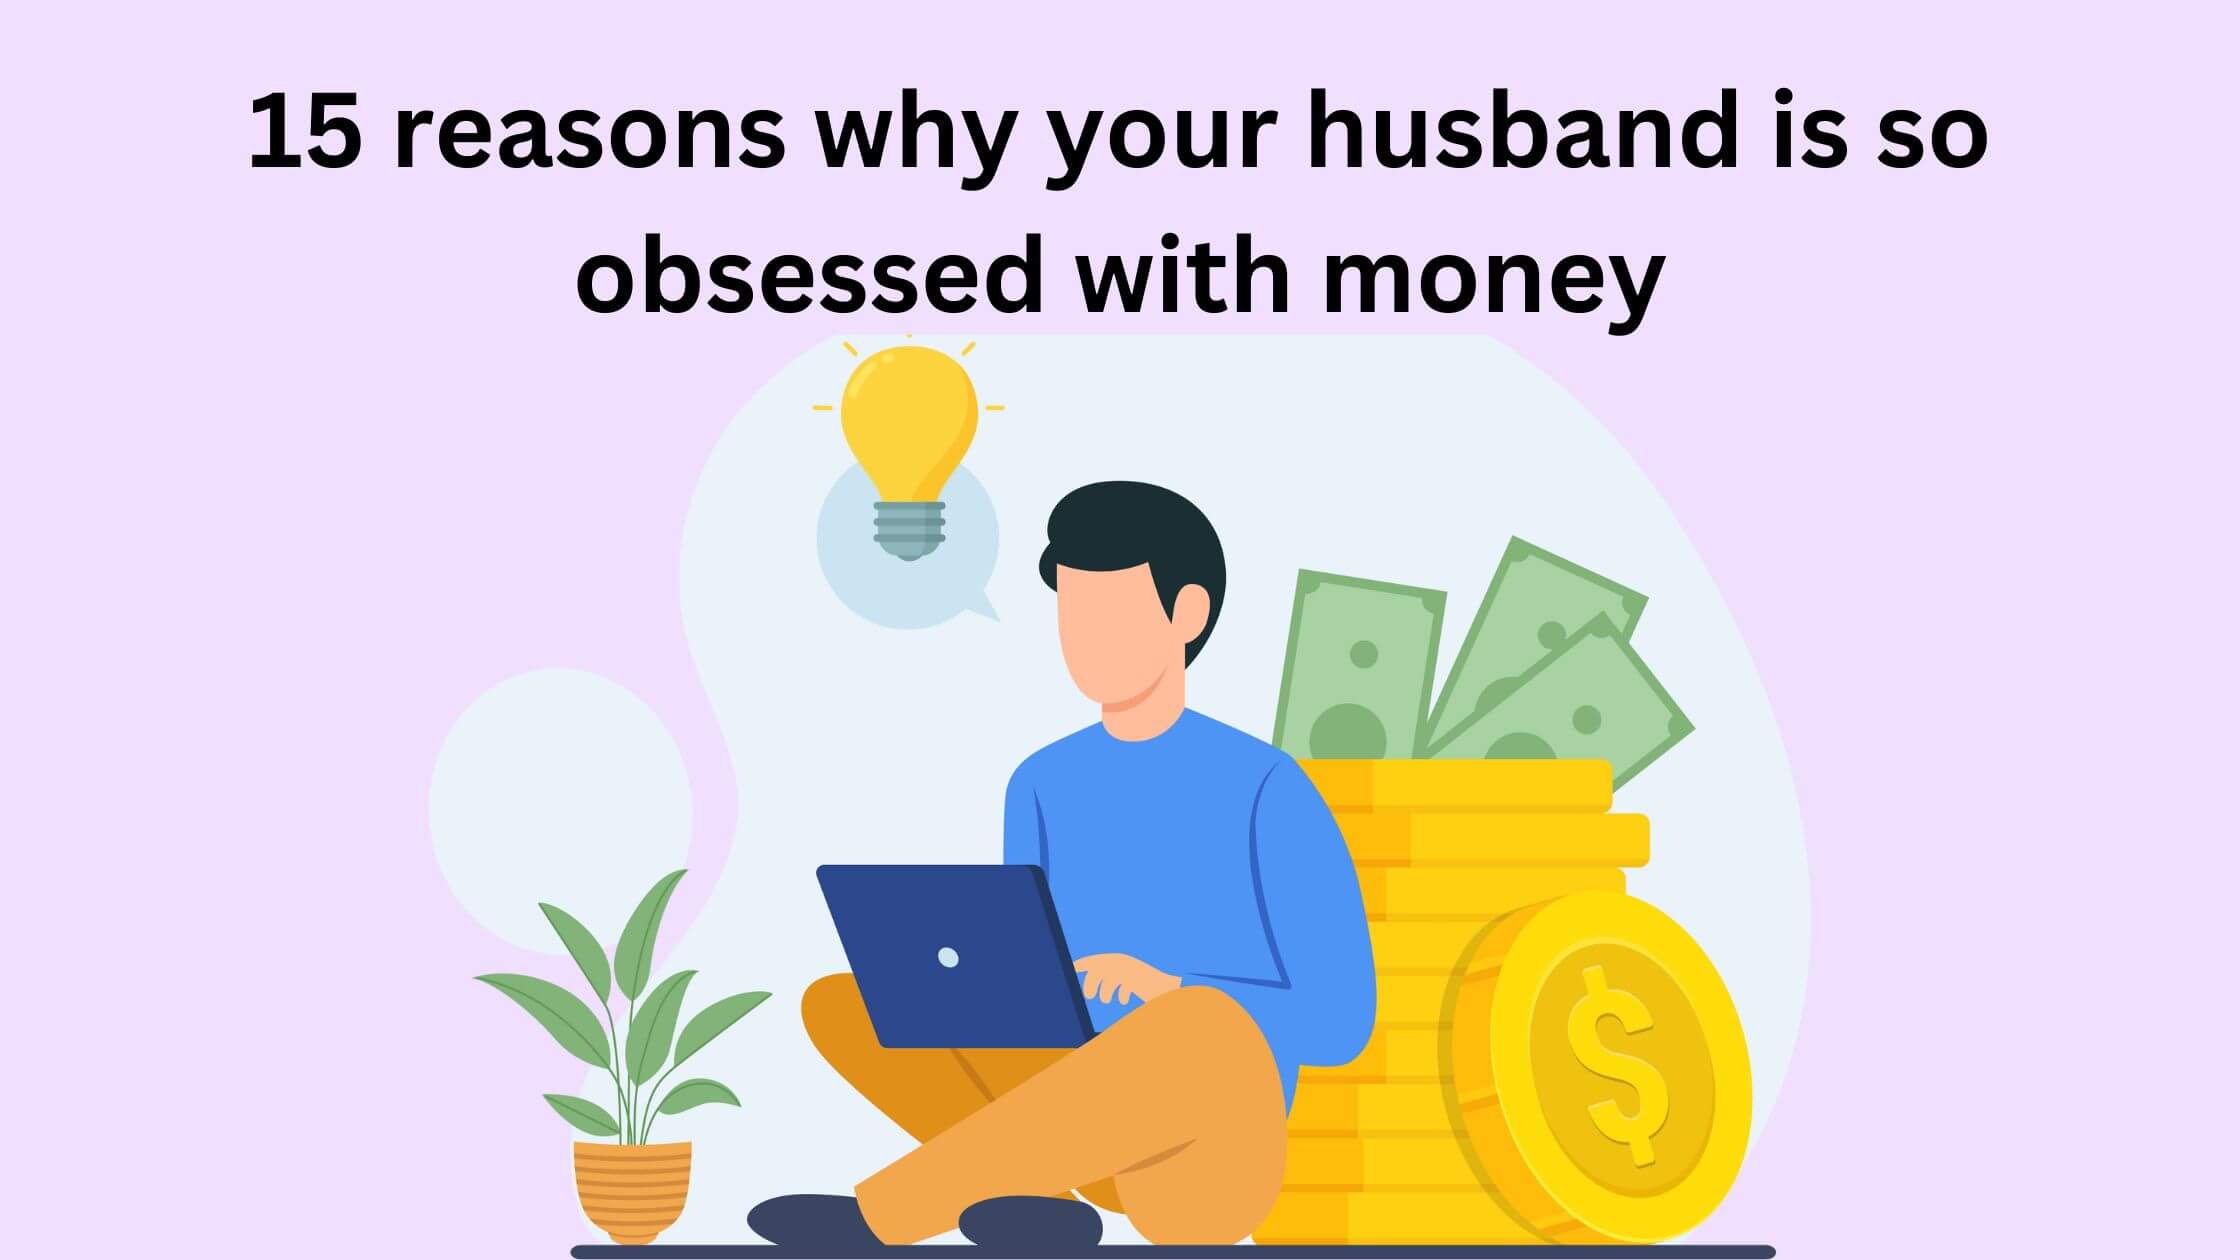 Why is my husband so obsessed with money